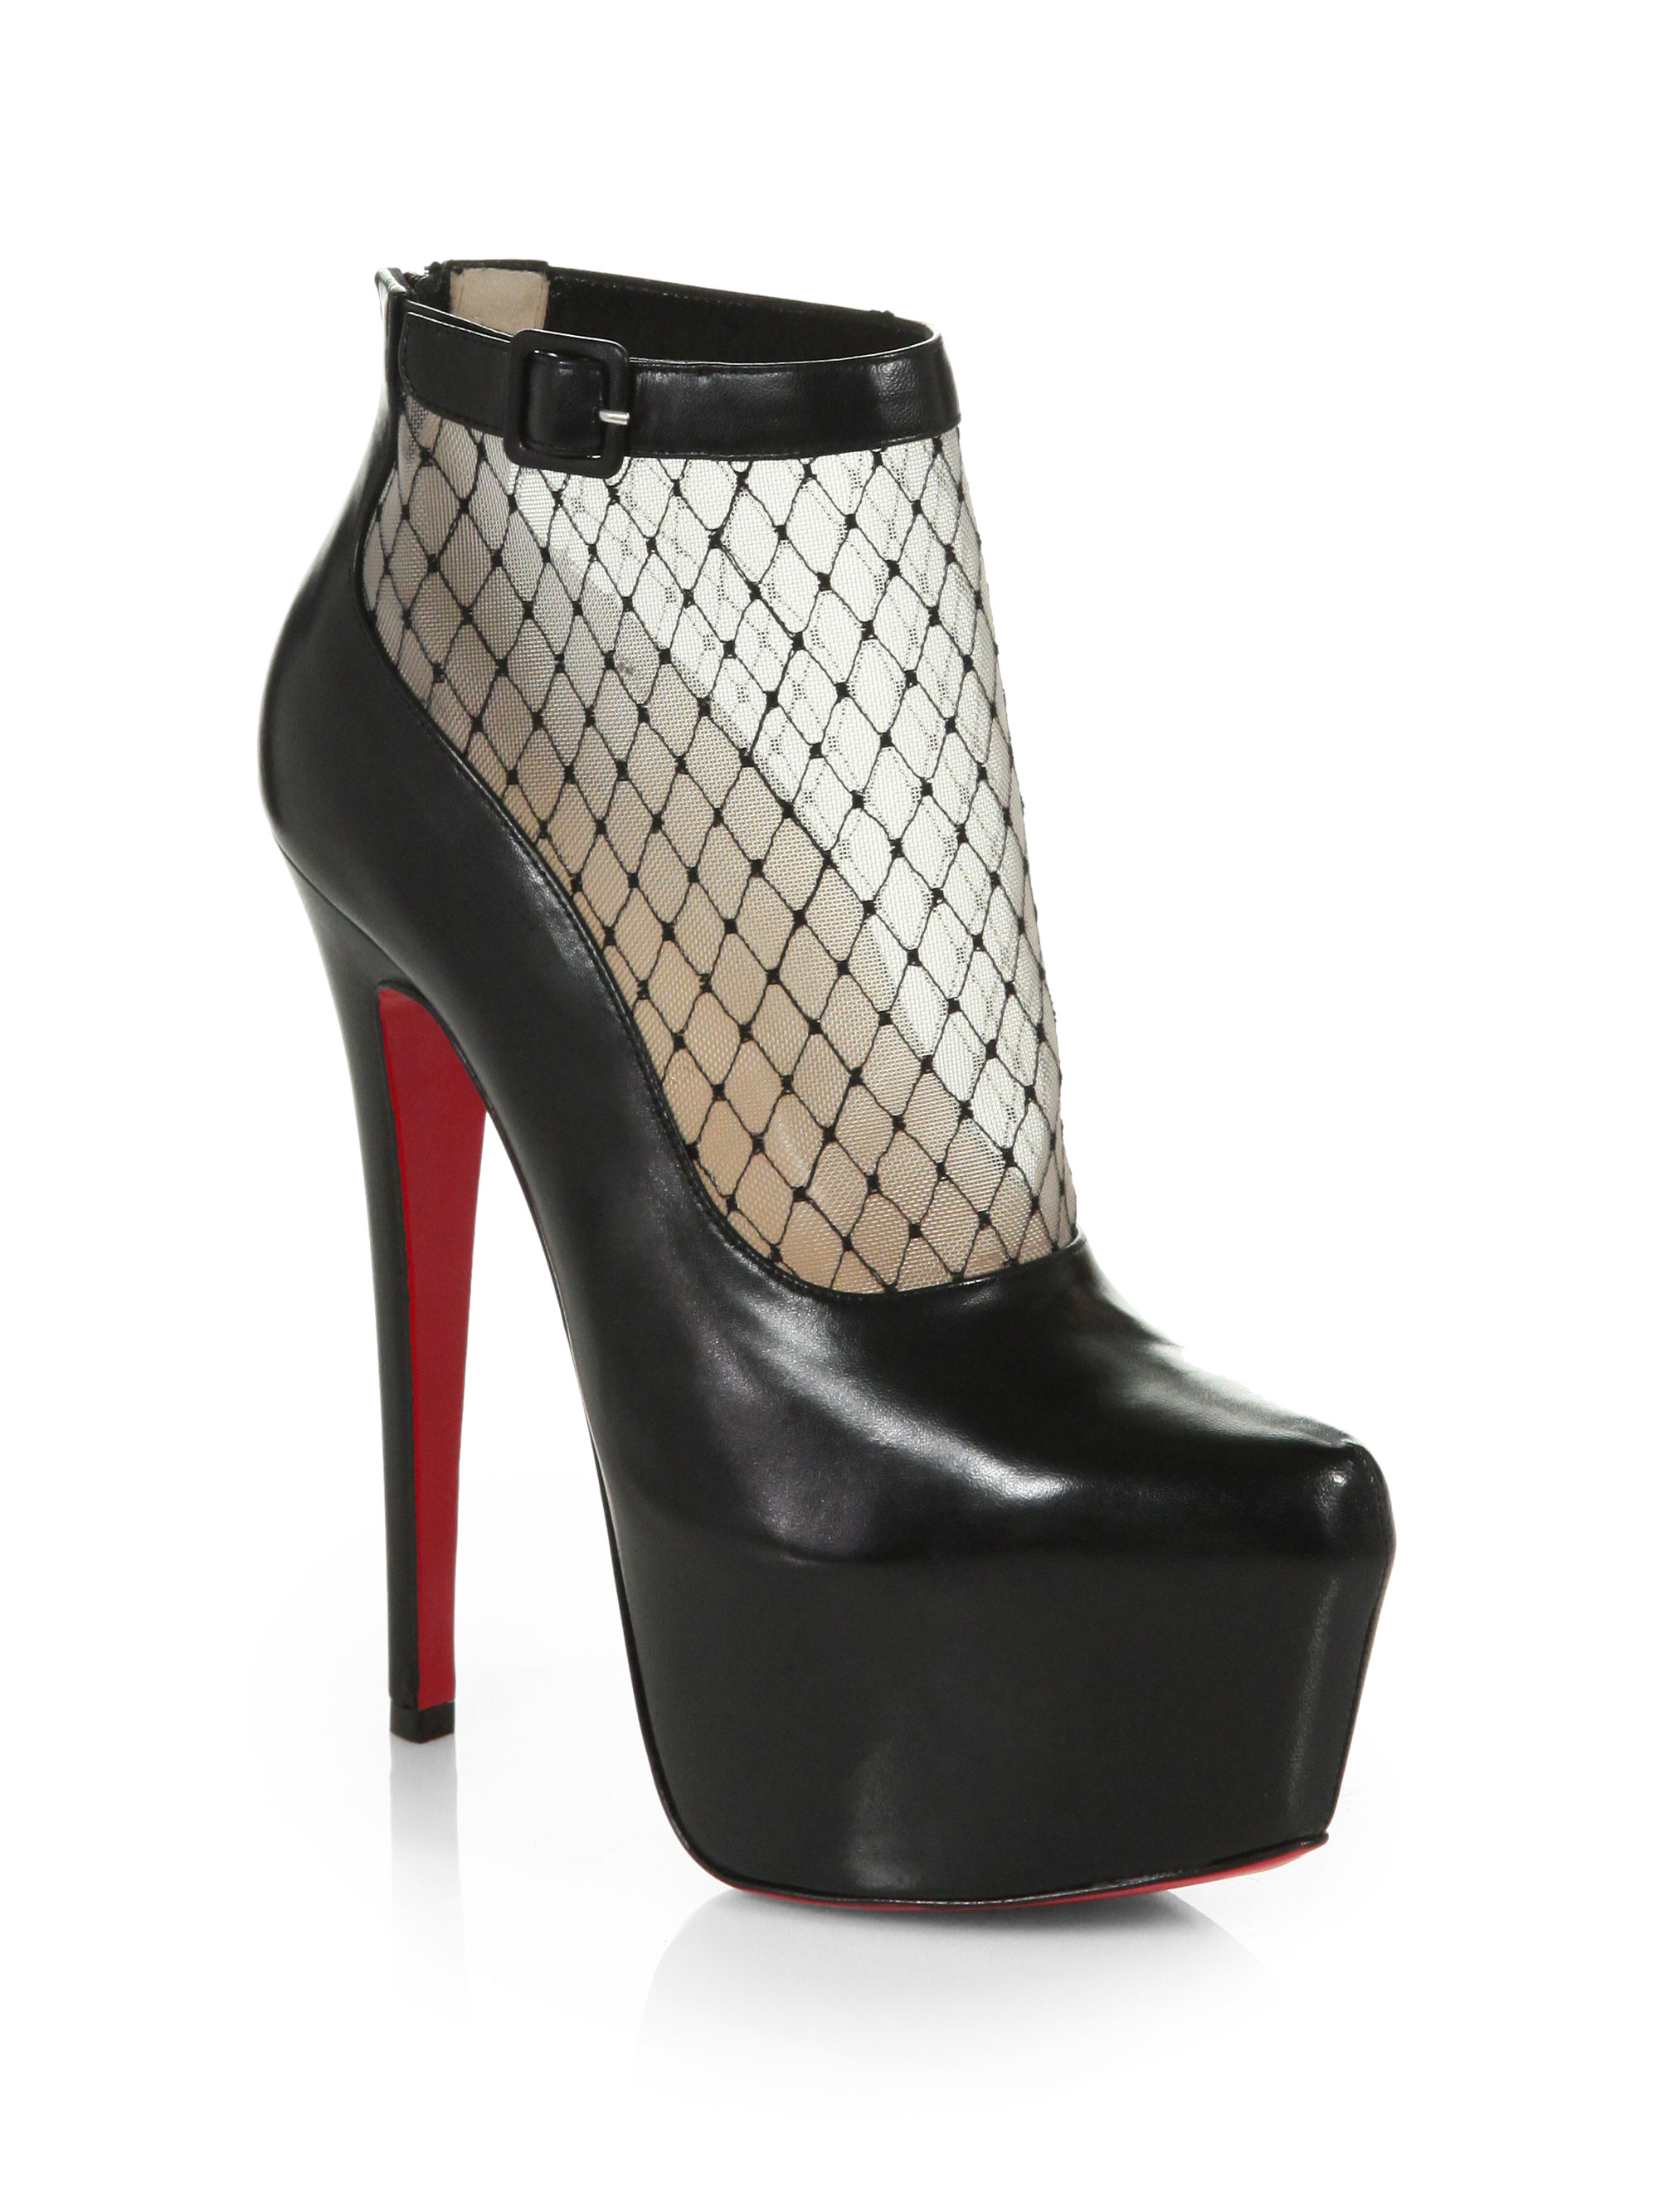 Christian louboutin Resillissima Leather Mesh Platform Ankle Boots in ...